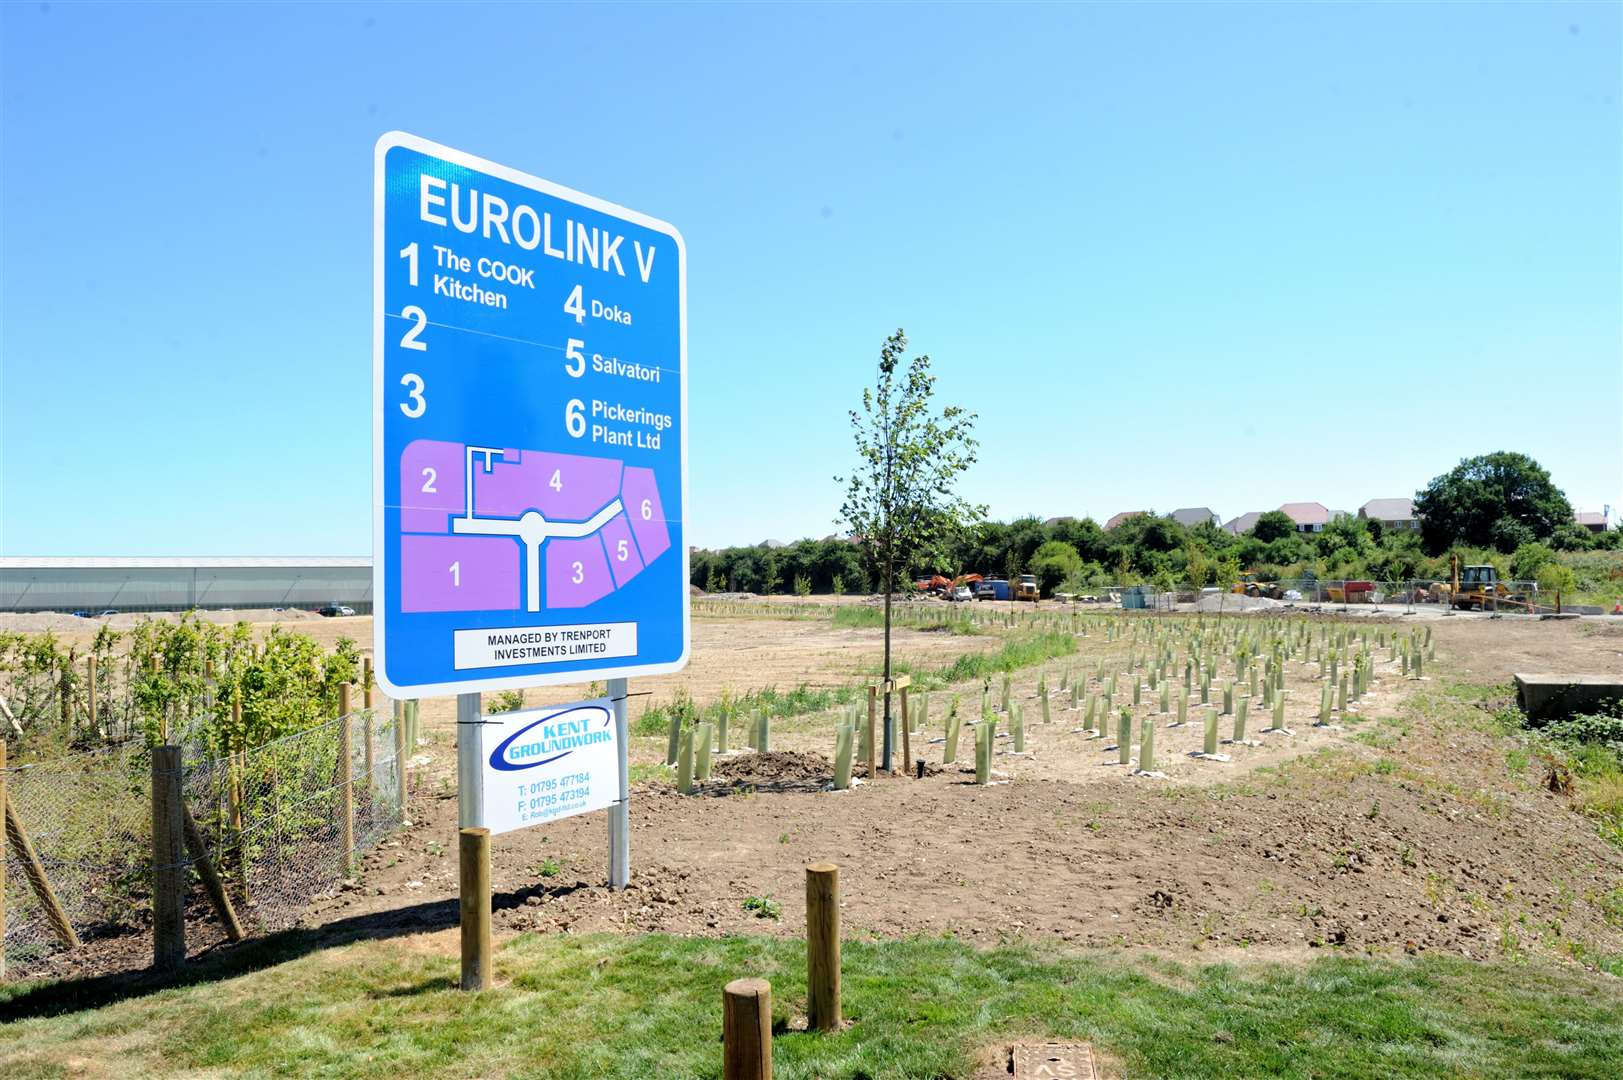 Cook has expanded its presence on Eurolink Way, Sittingbourne